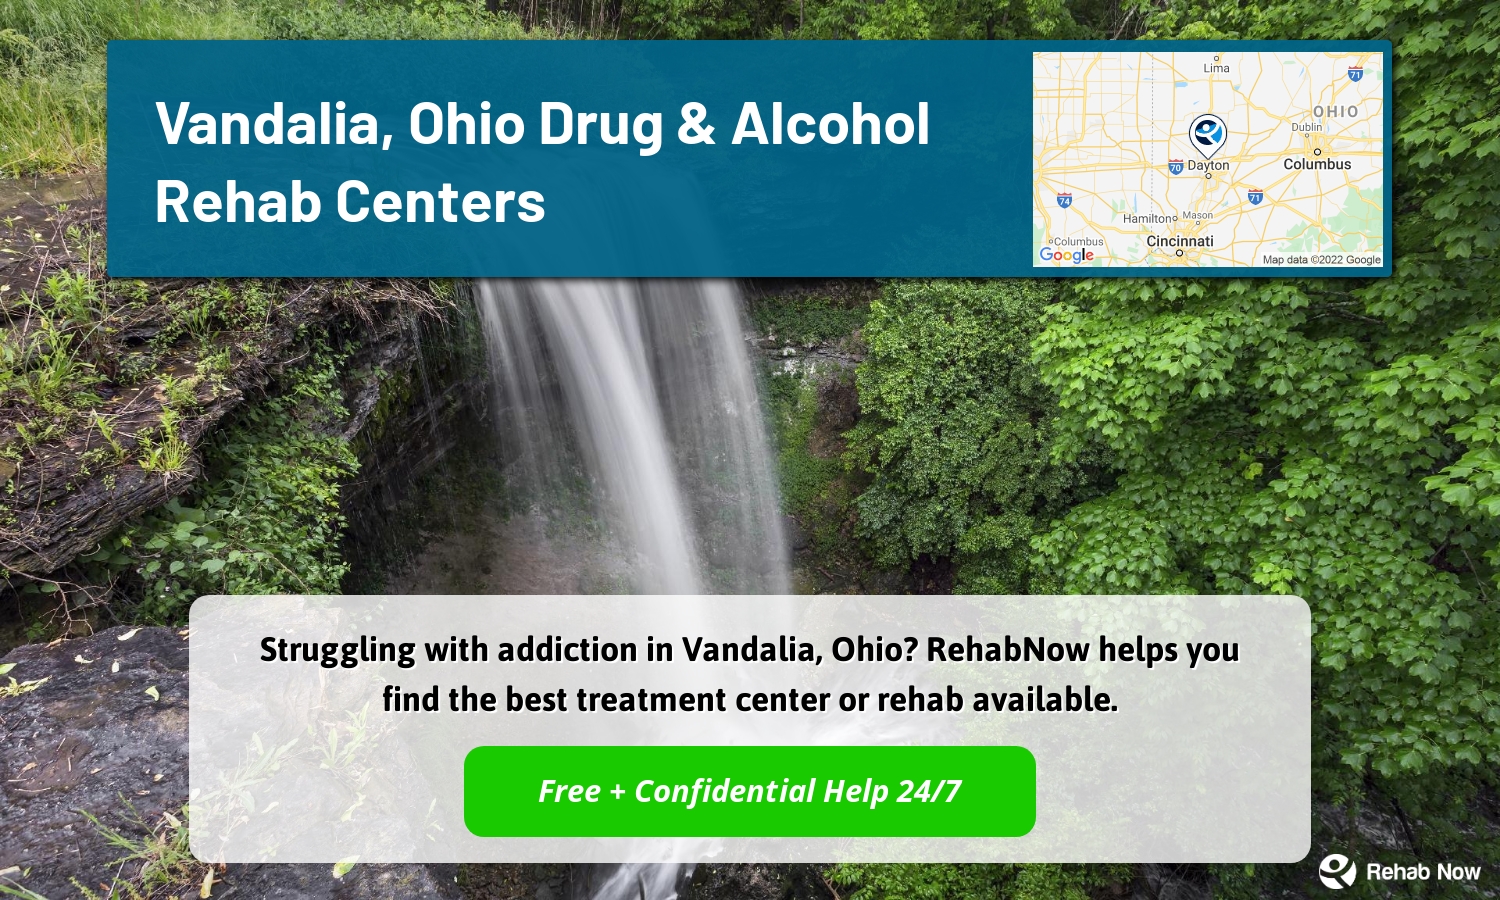 Struggling with addiction in Vandalia, Ohio? RehabNow helps you find the best treatment center or rehab available.